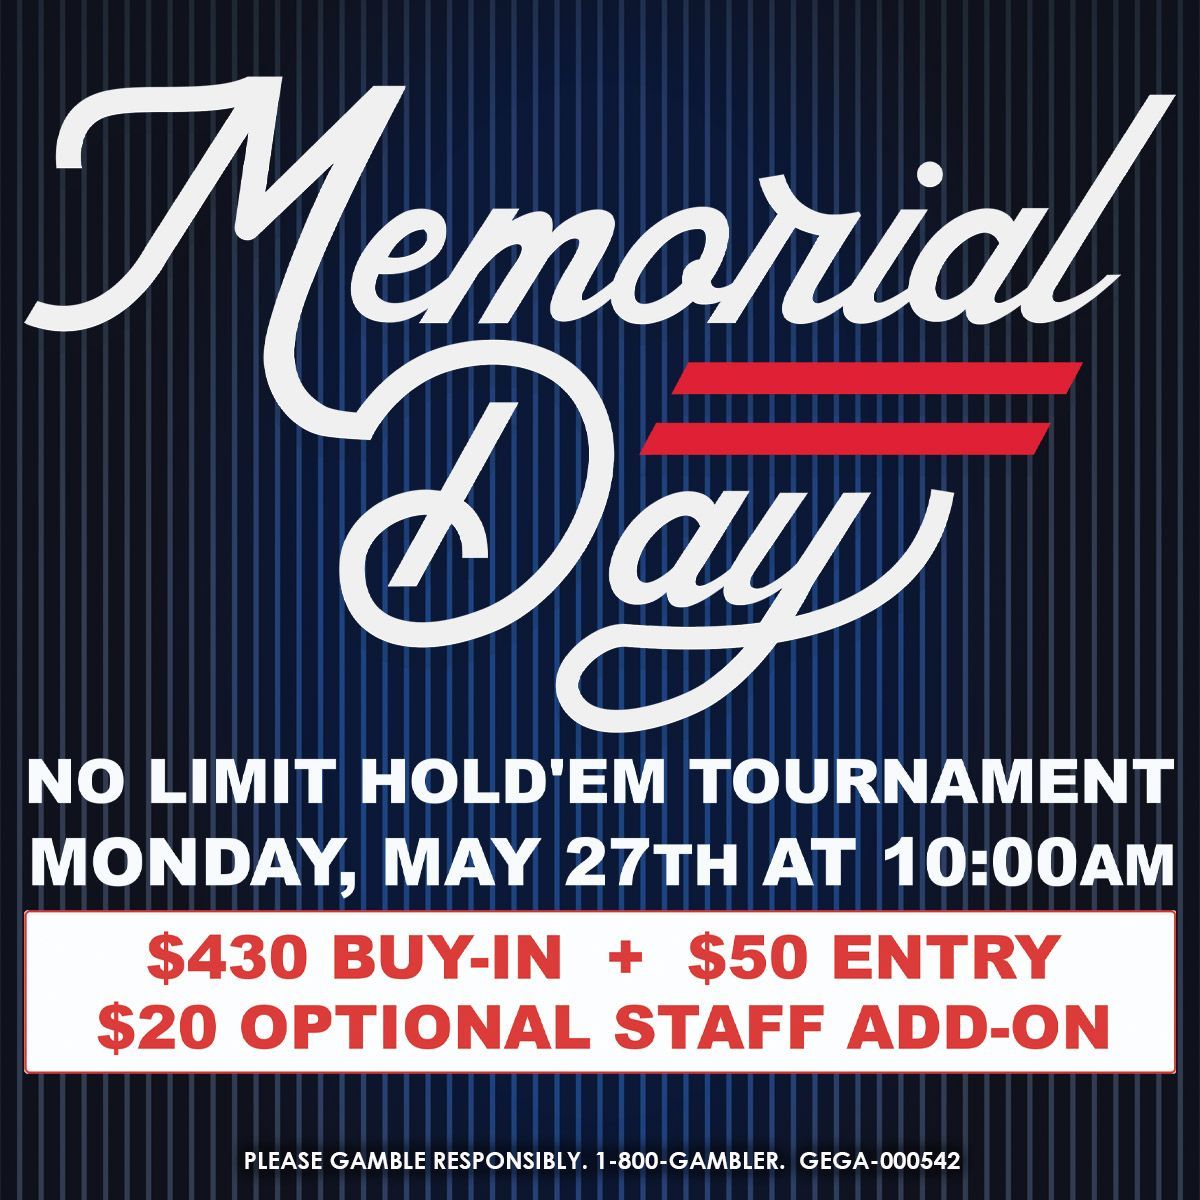 Memorial Day Tournament! Monday may 27